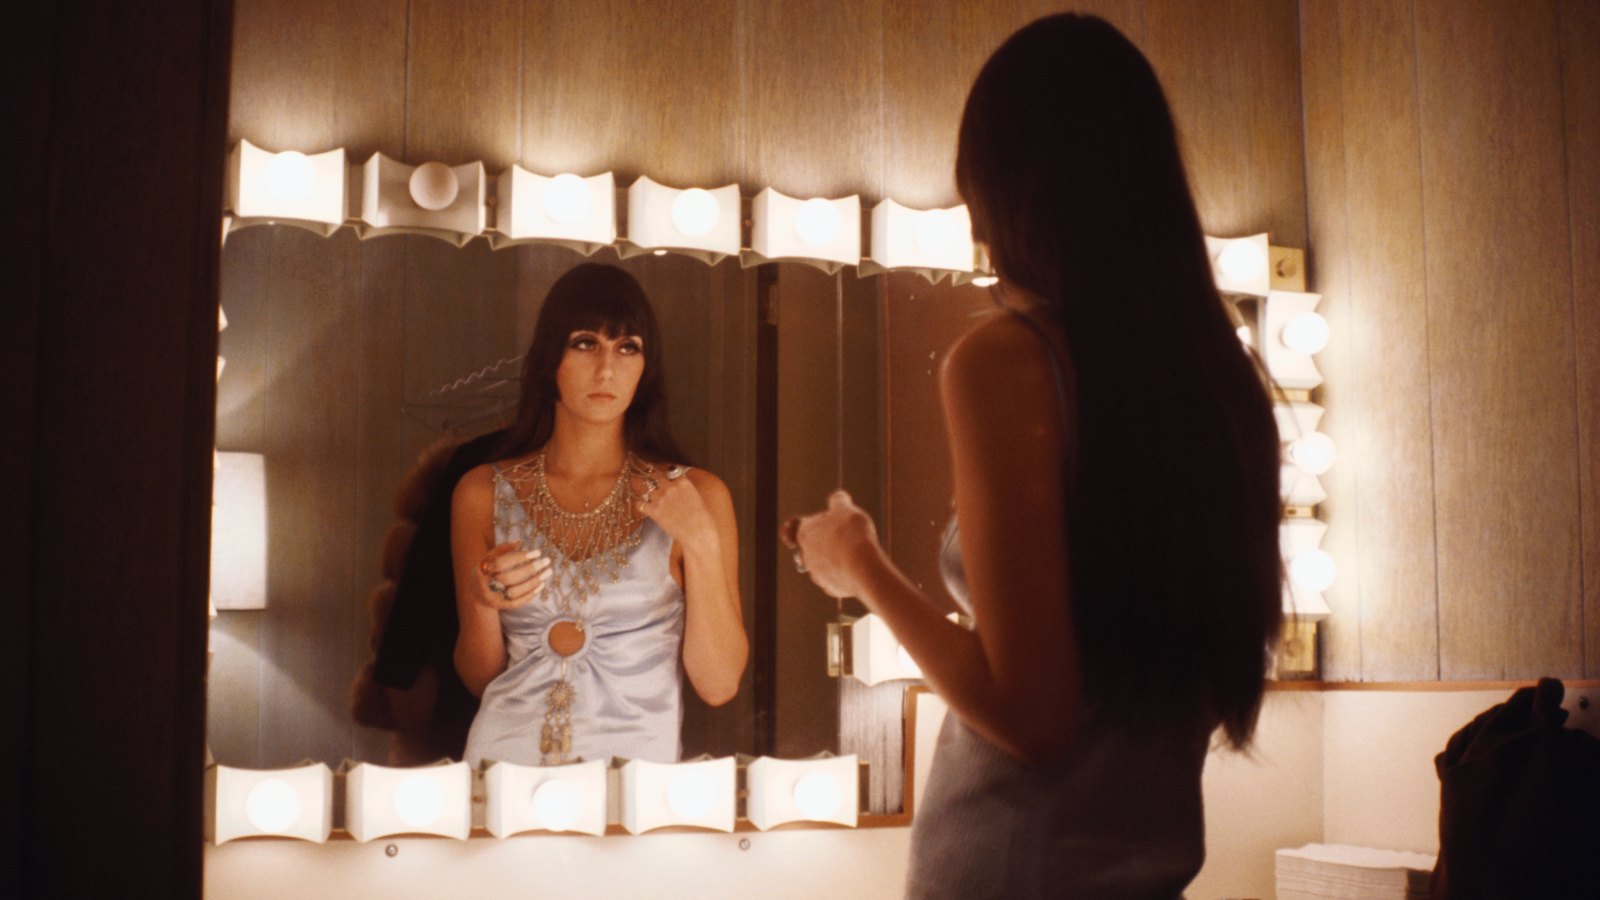 LOS ANGELES - MARCH 1968: Entertainer Cher fixes her make up in a dressing room mirror in March 1968 in Los Angeles, California. (Photo by Michael Ochs Archives/Getty Images)